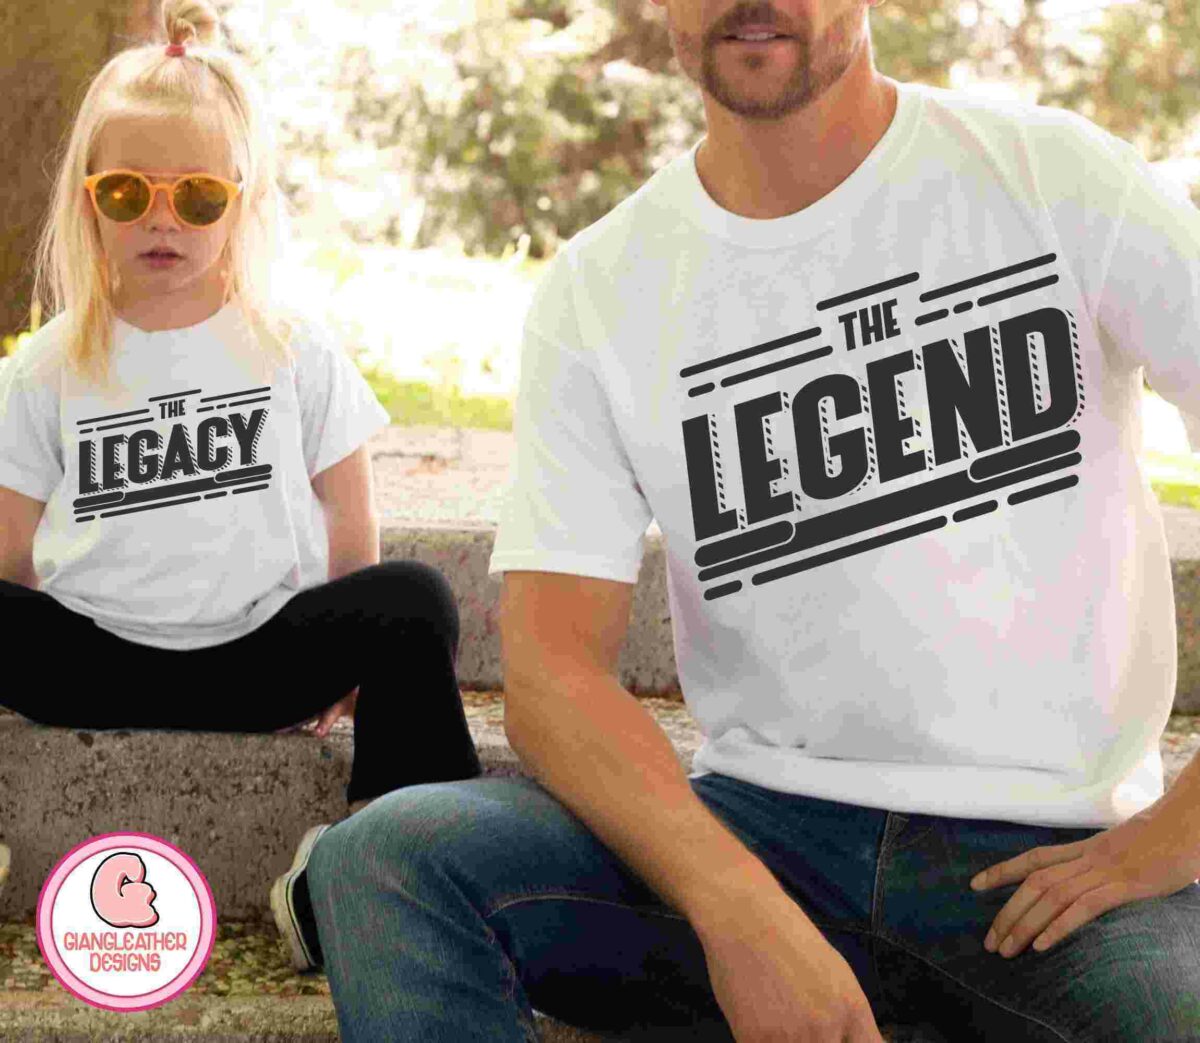 A child wearing a "The Legacy" t-shirt sits next to an adult wearing a "The Legend" t-shirt. They are sitting outside on a stone bench.